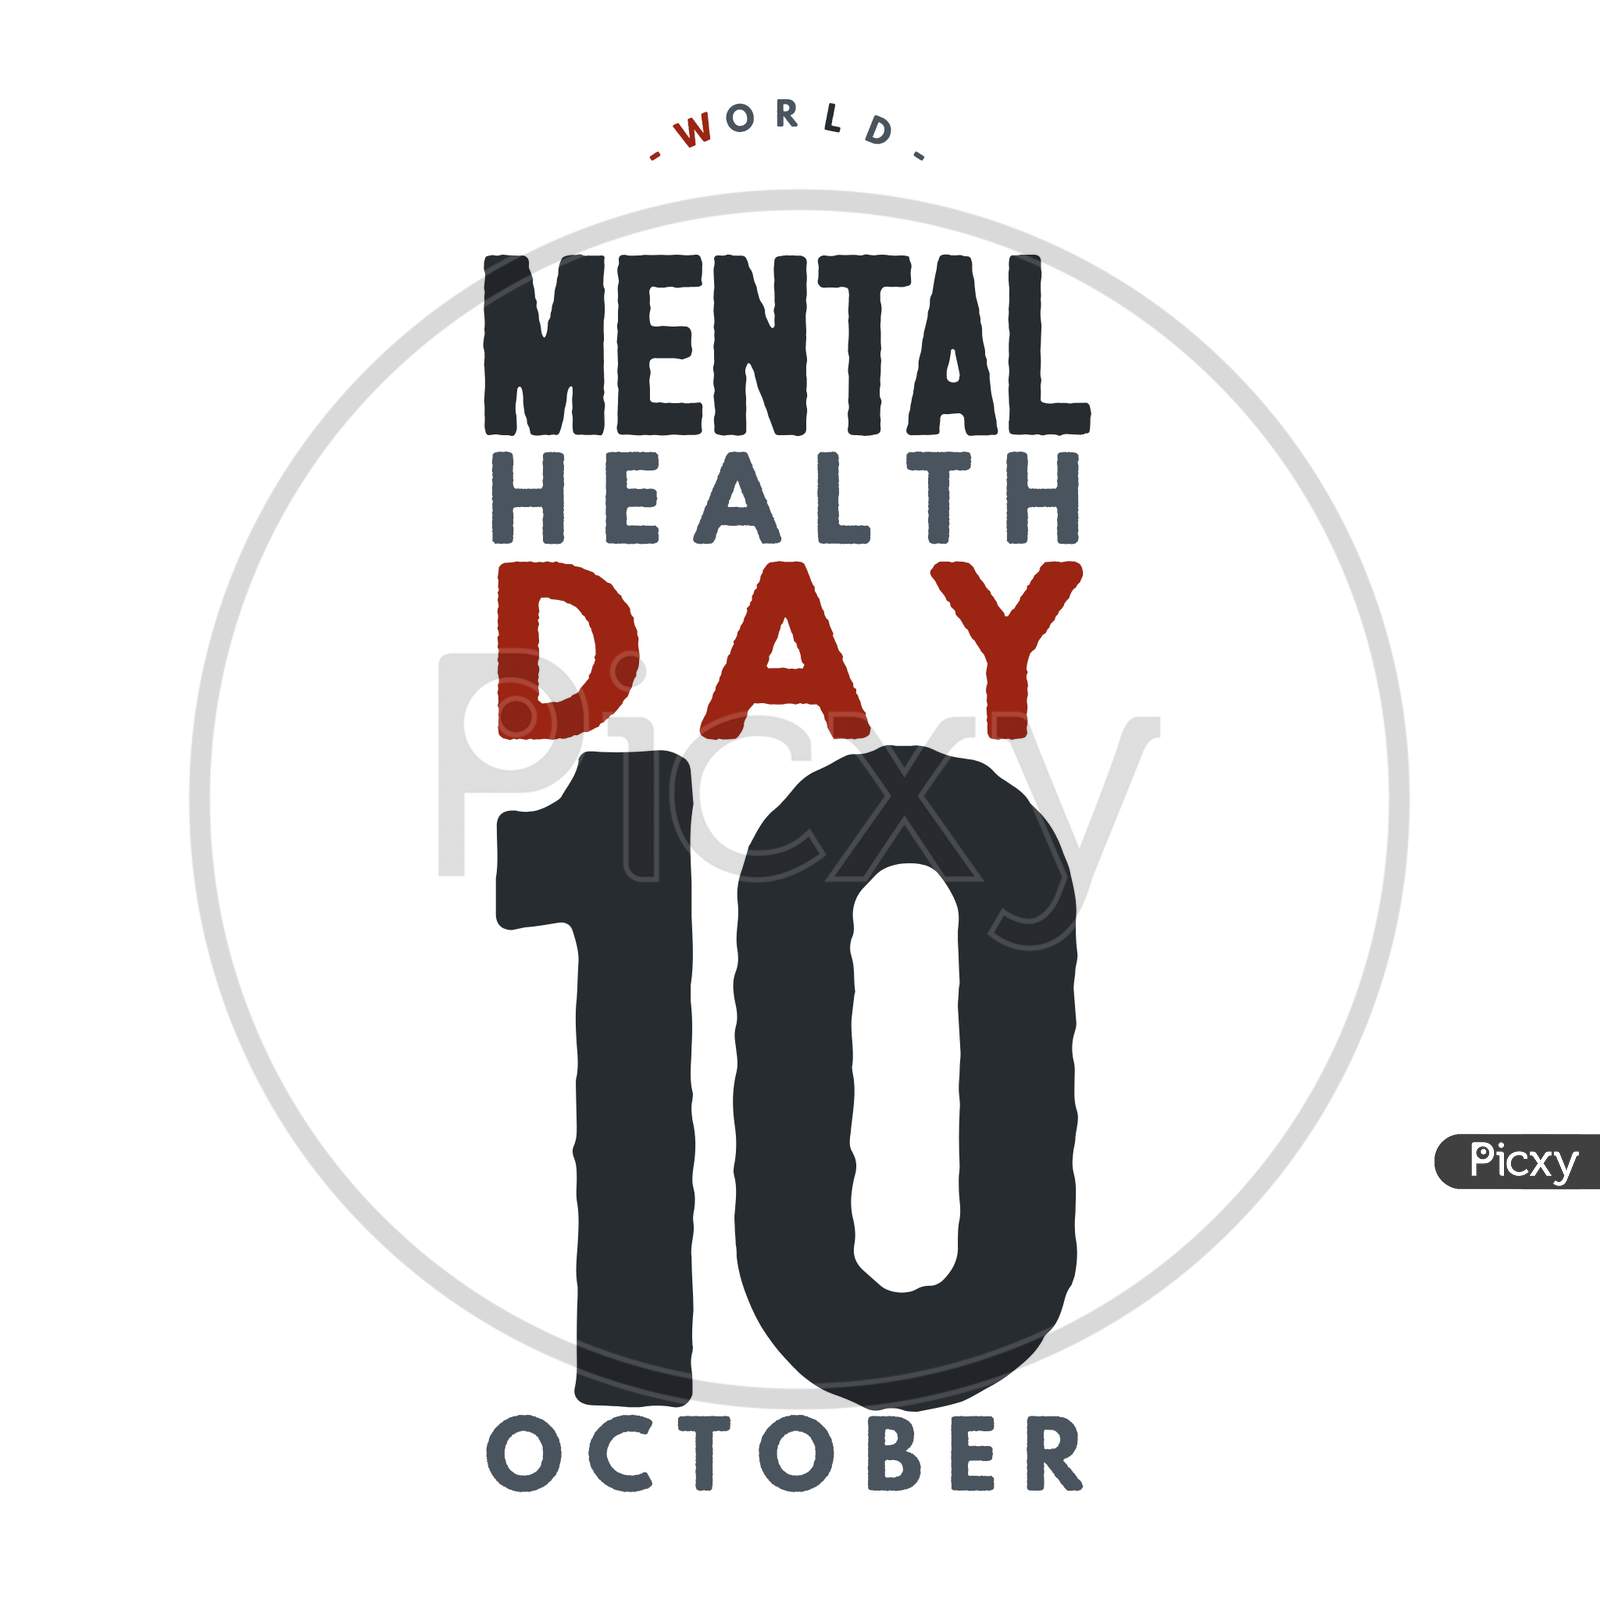 Image With Text "World Mental Health Day 10 October"